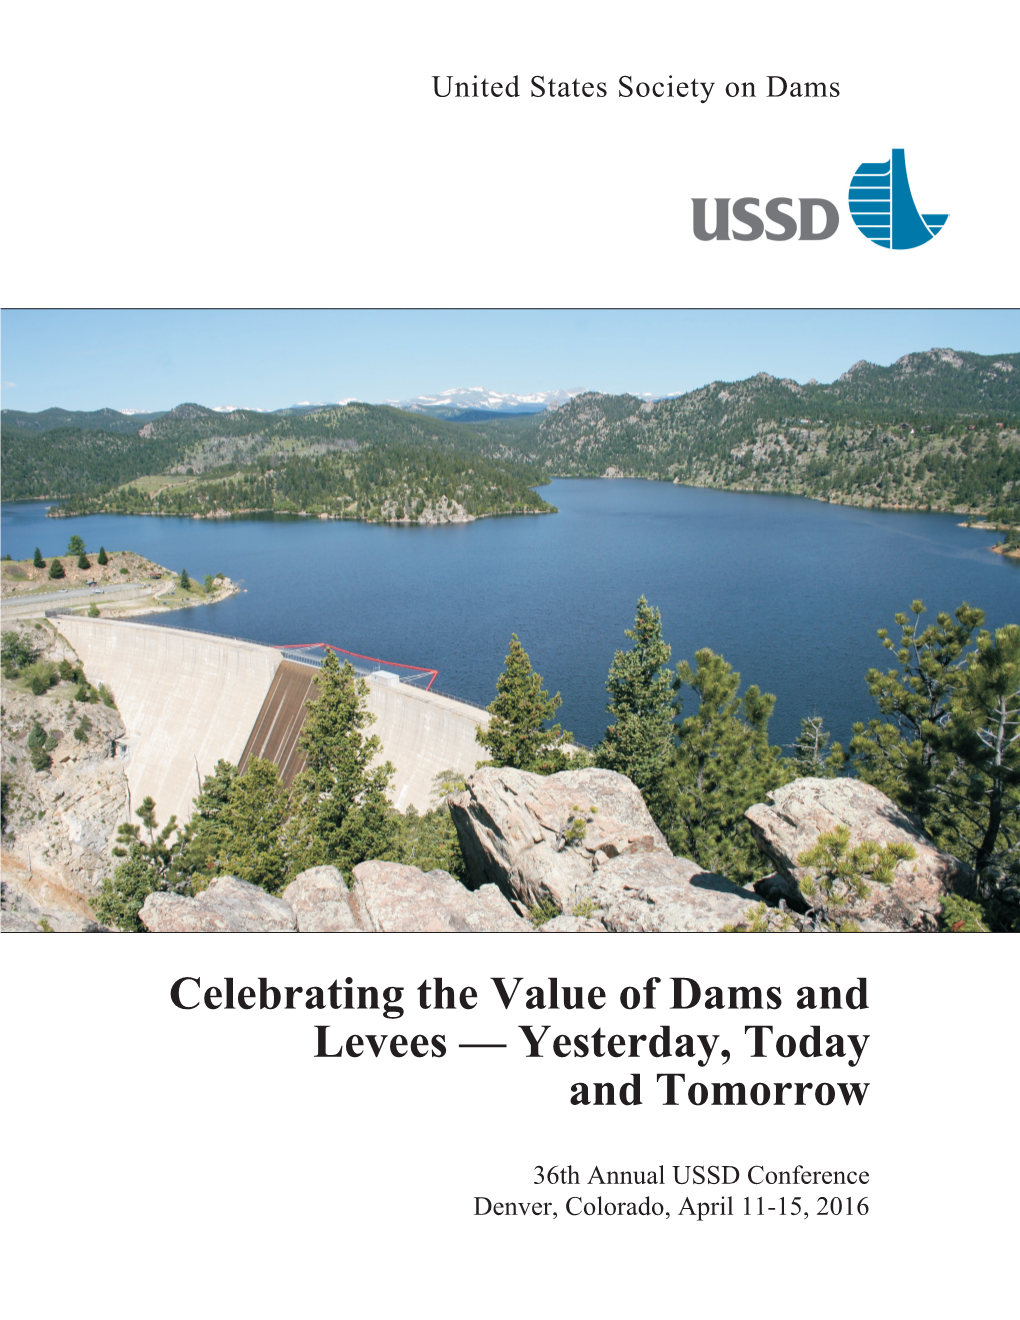 Celebrating the Value of Dams and Levees — Yesterday, Today and Tomorrow